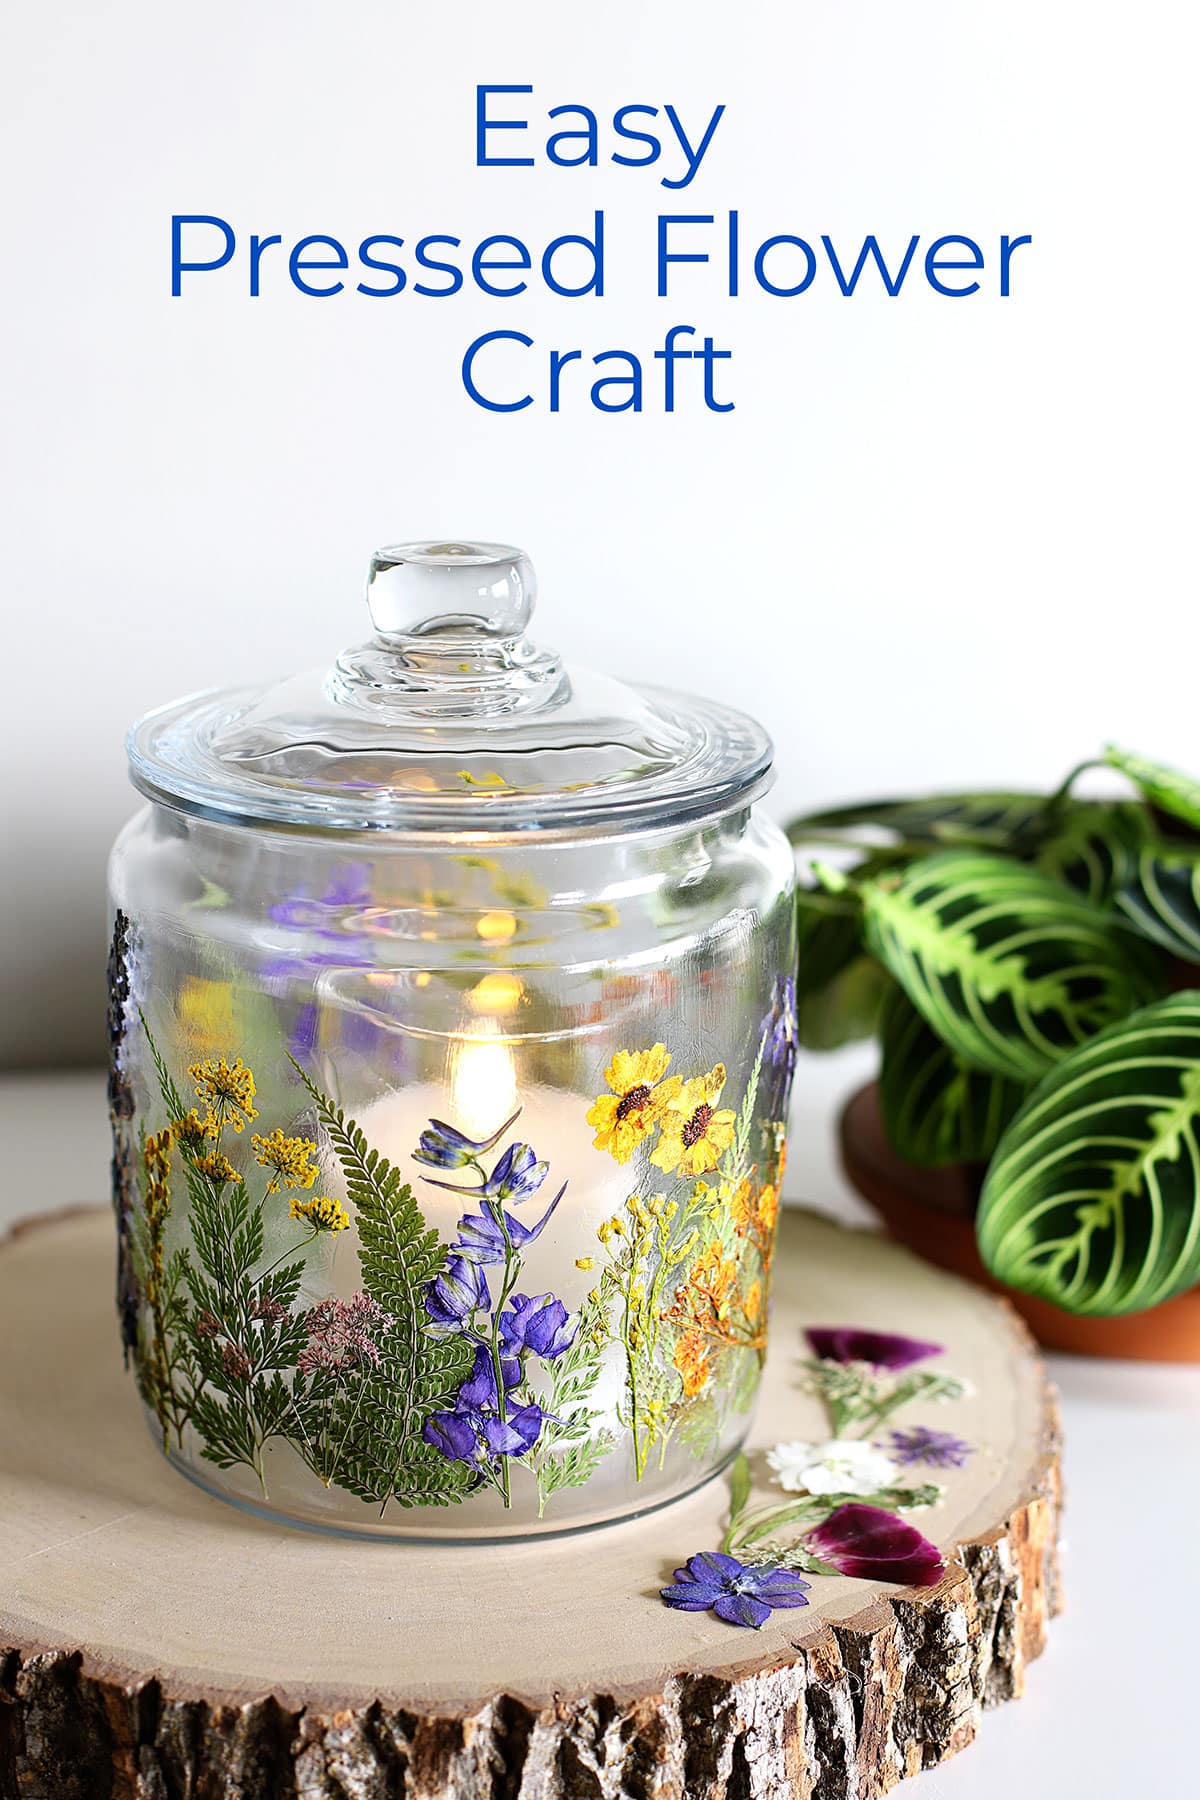 Glass jar with pressed flowers decoupaged onto it with a flickering candle inside. All setting on a wood slice. With the words Easy Pressed Flower Craft.